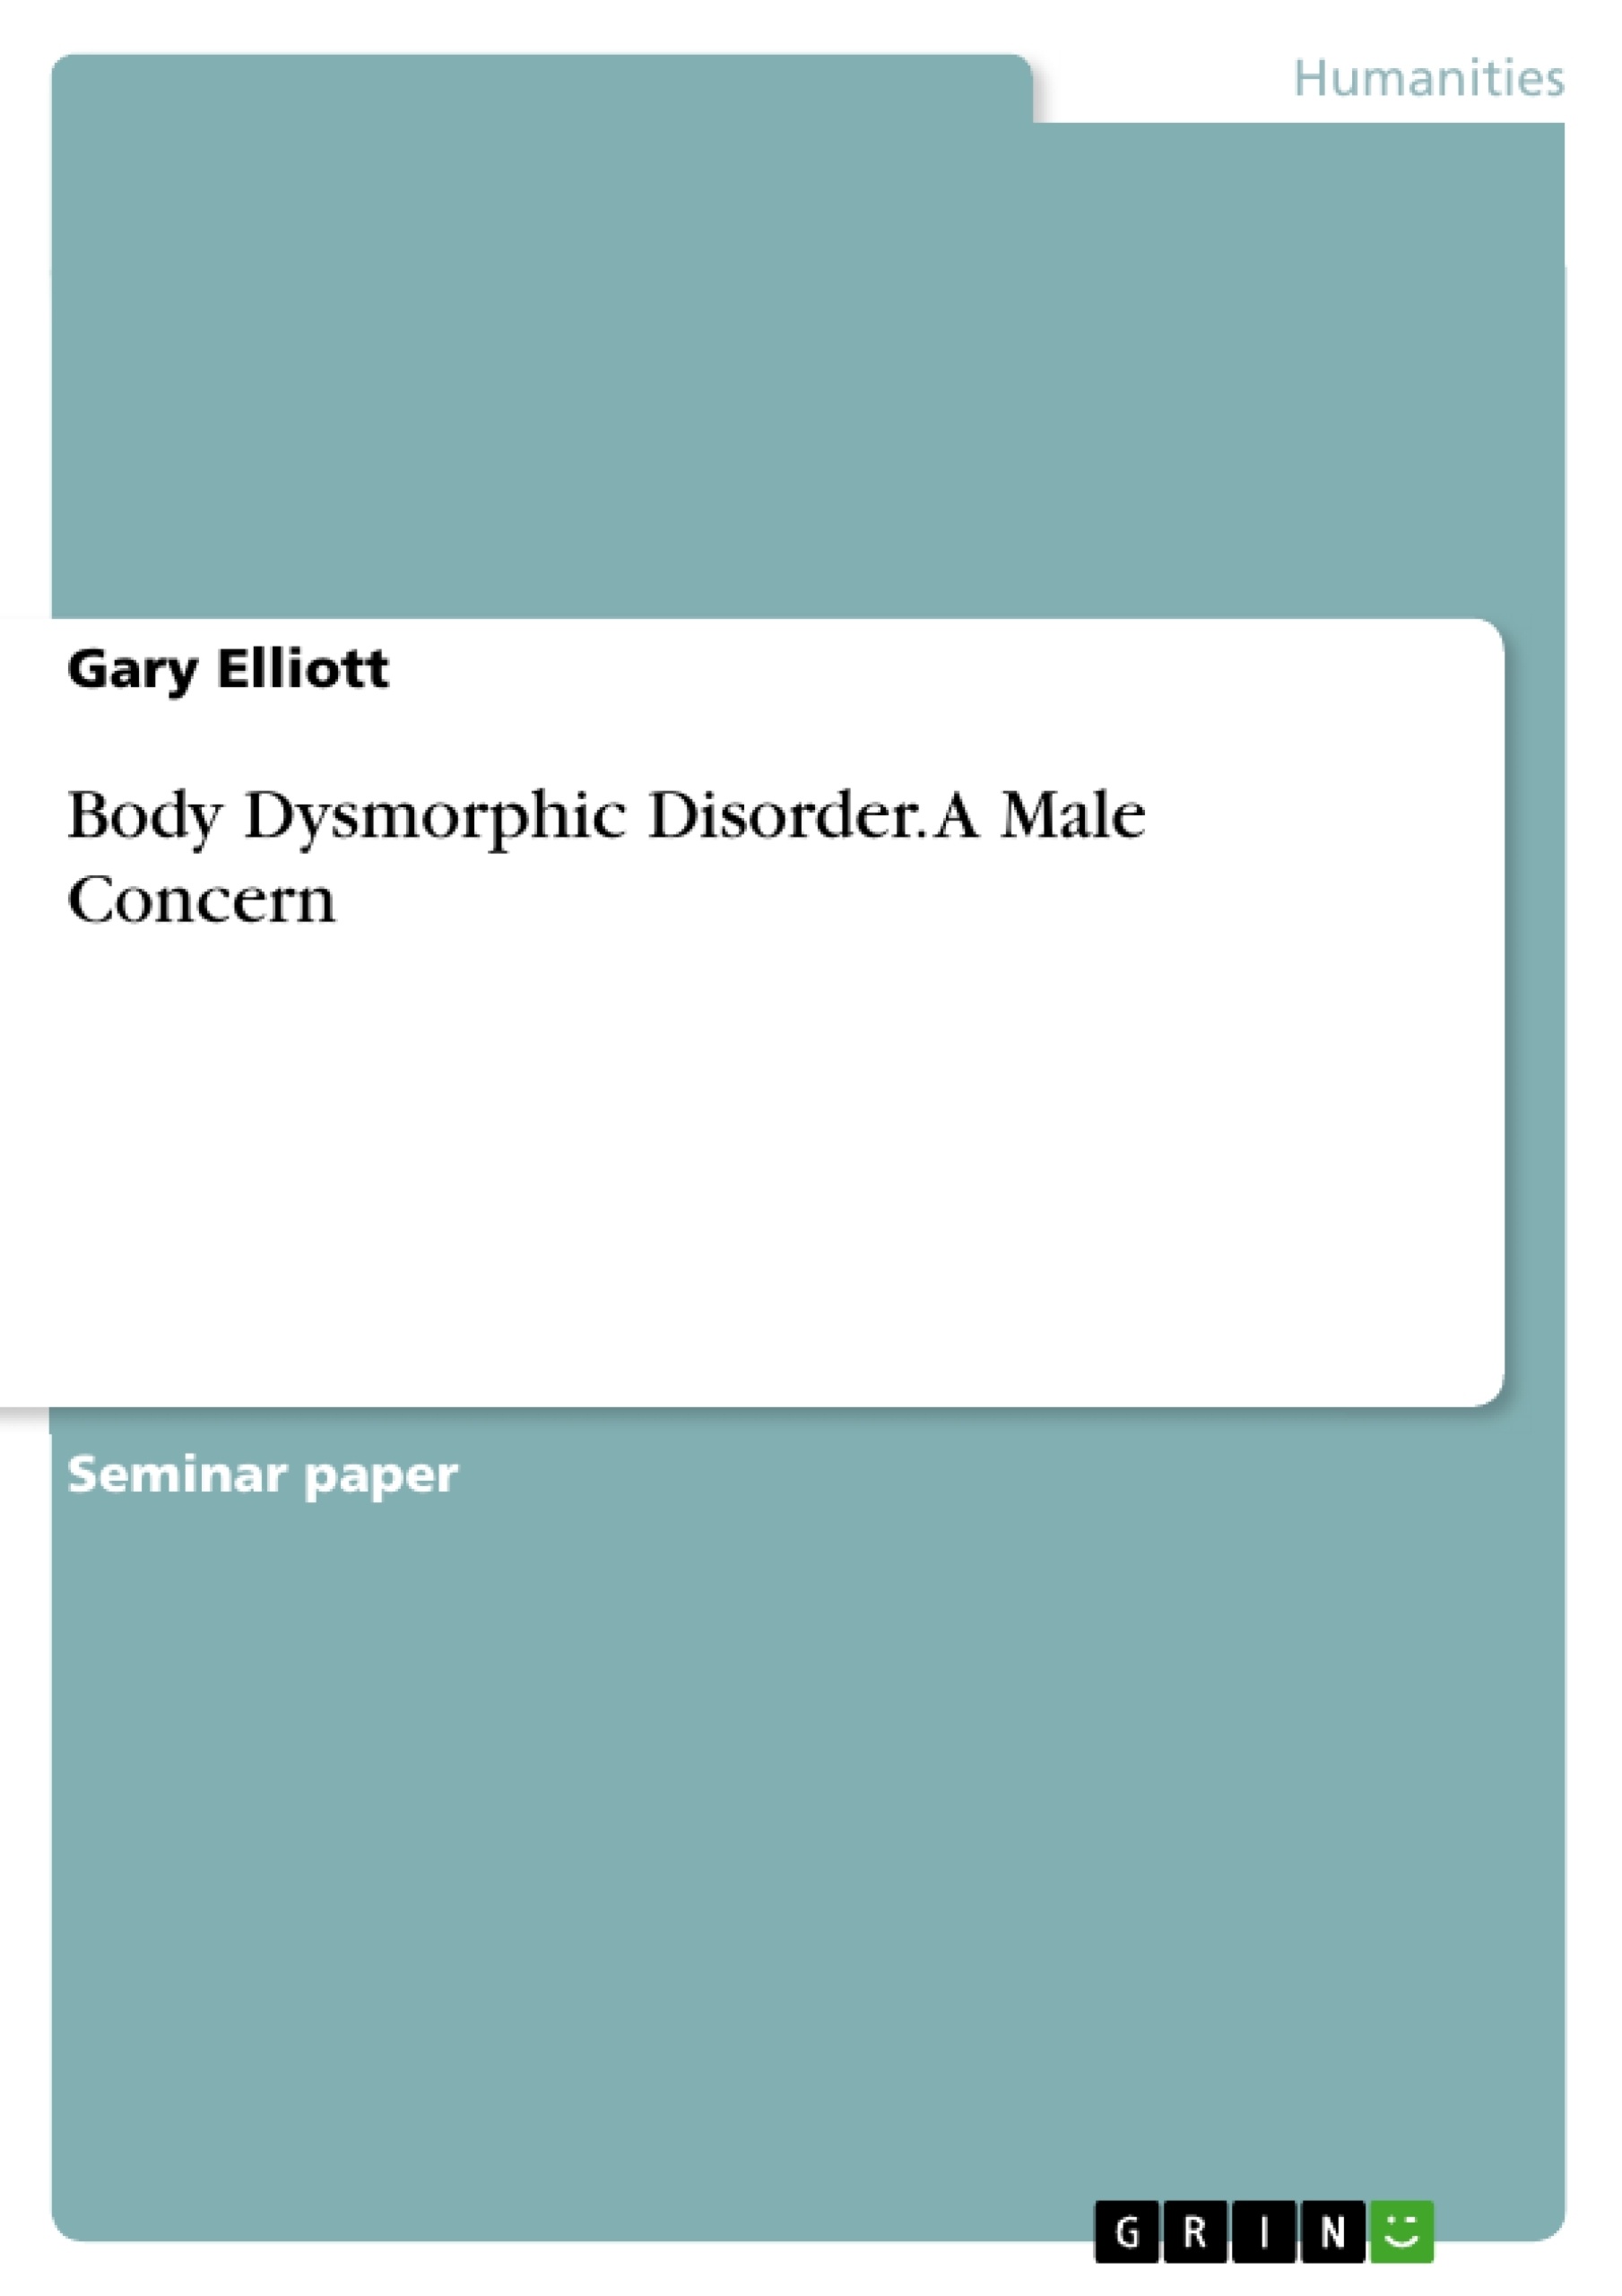 Title: Body Dysmorphic Disorder. A Male Concern